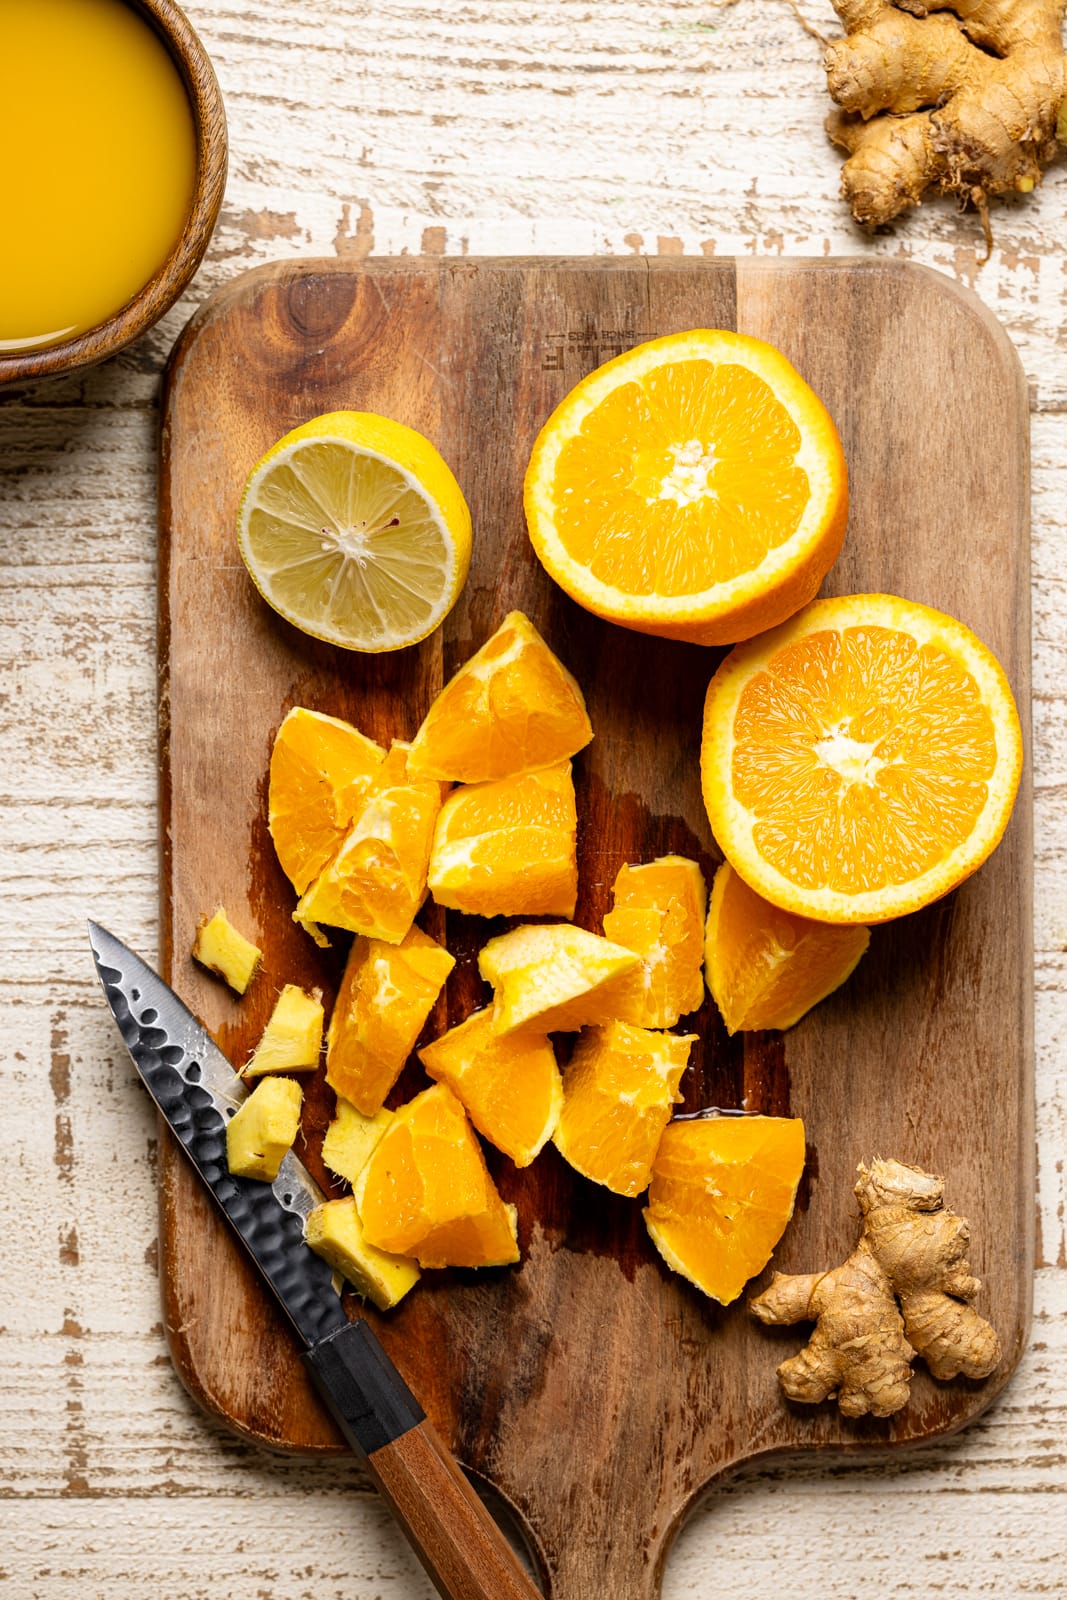 Ingredients for Detox Green Tea Shot Recipe. Sliced oranges, lemons, and ginger on a cutting board with a knife.